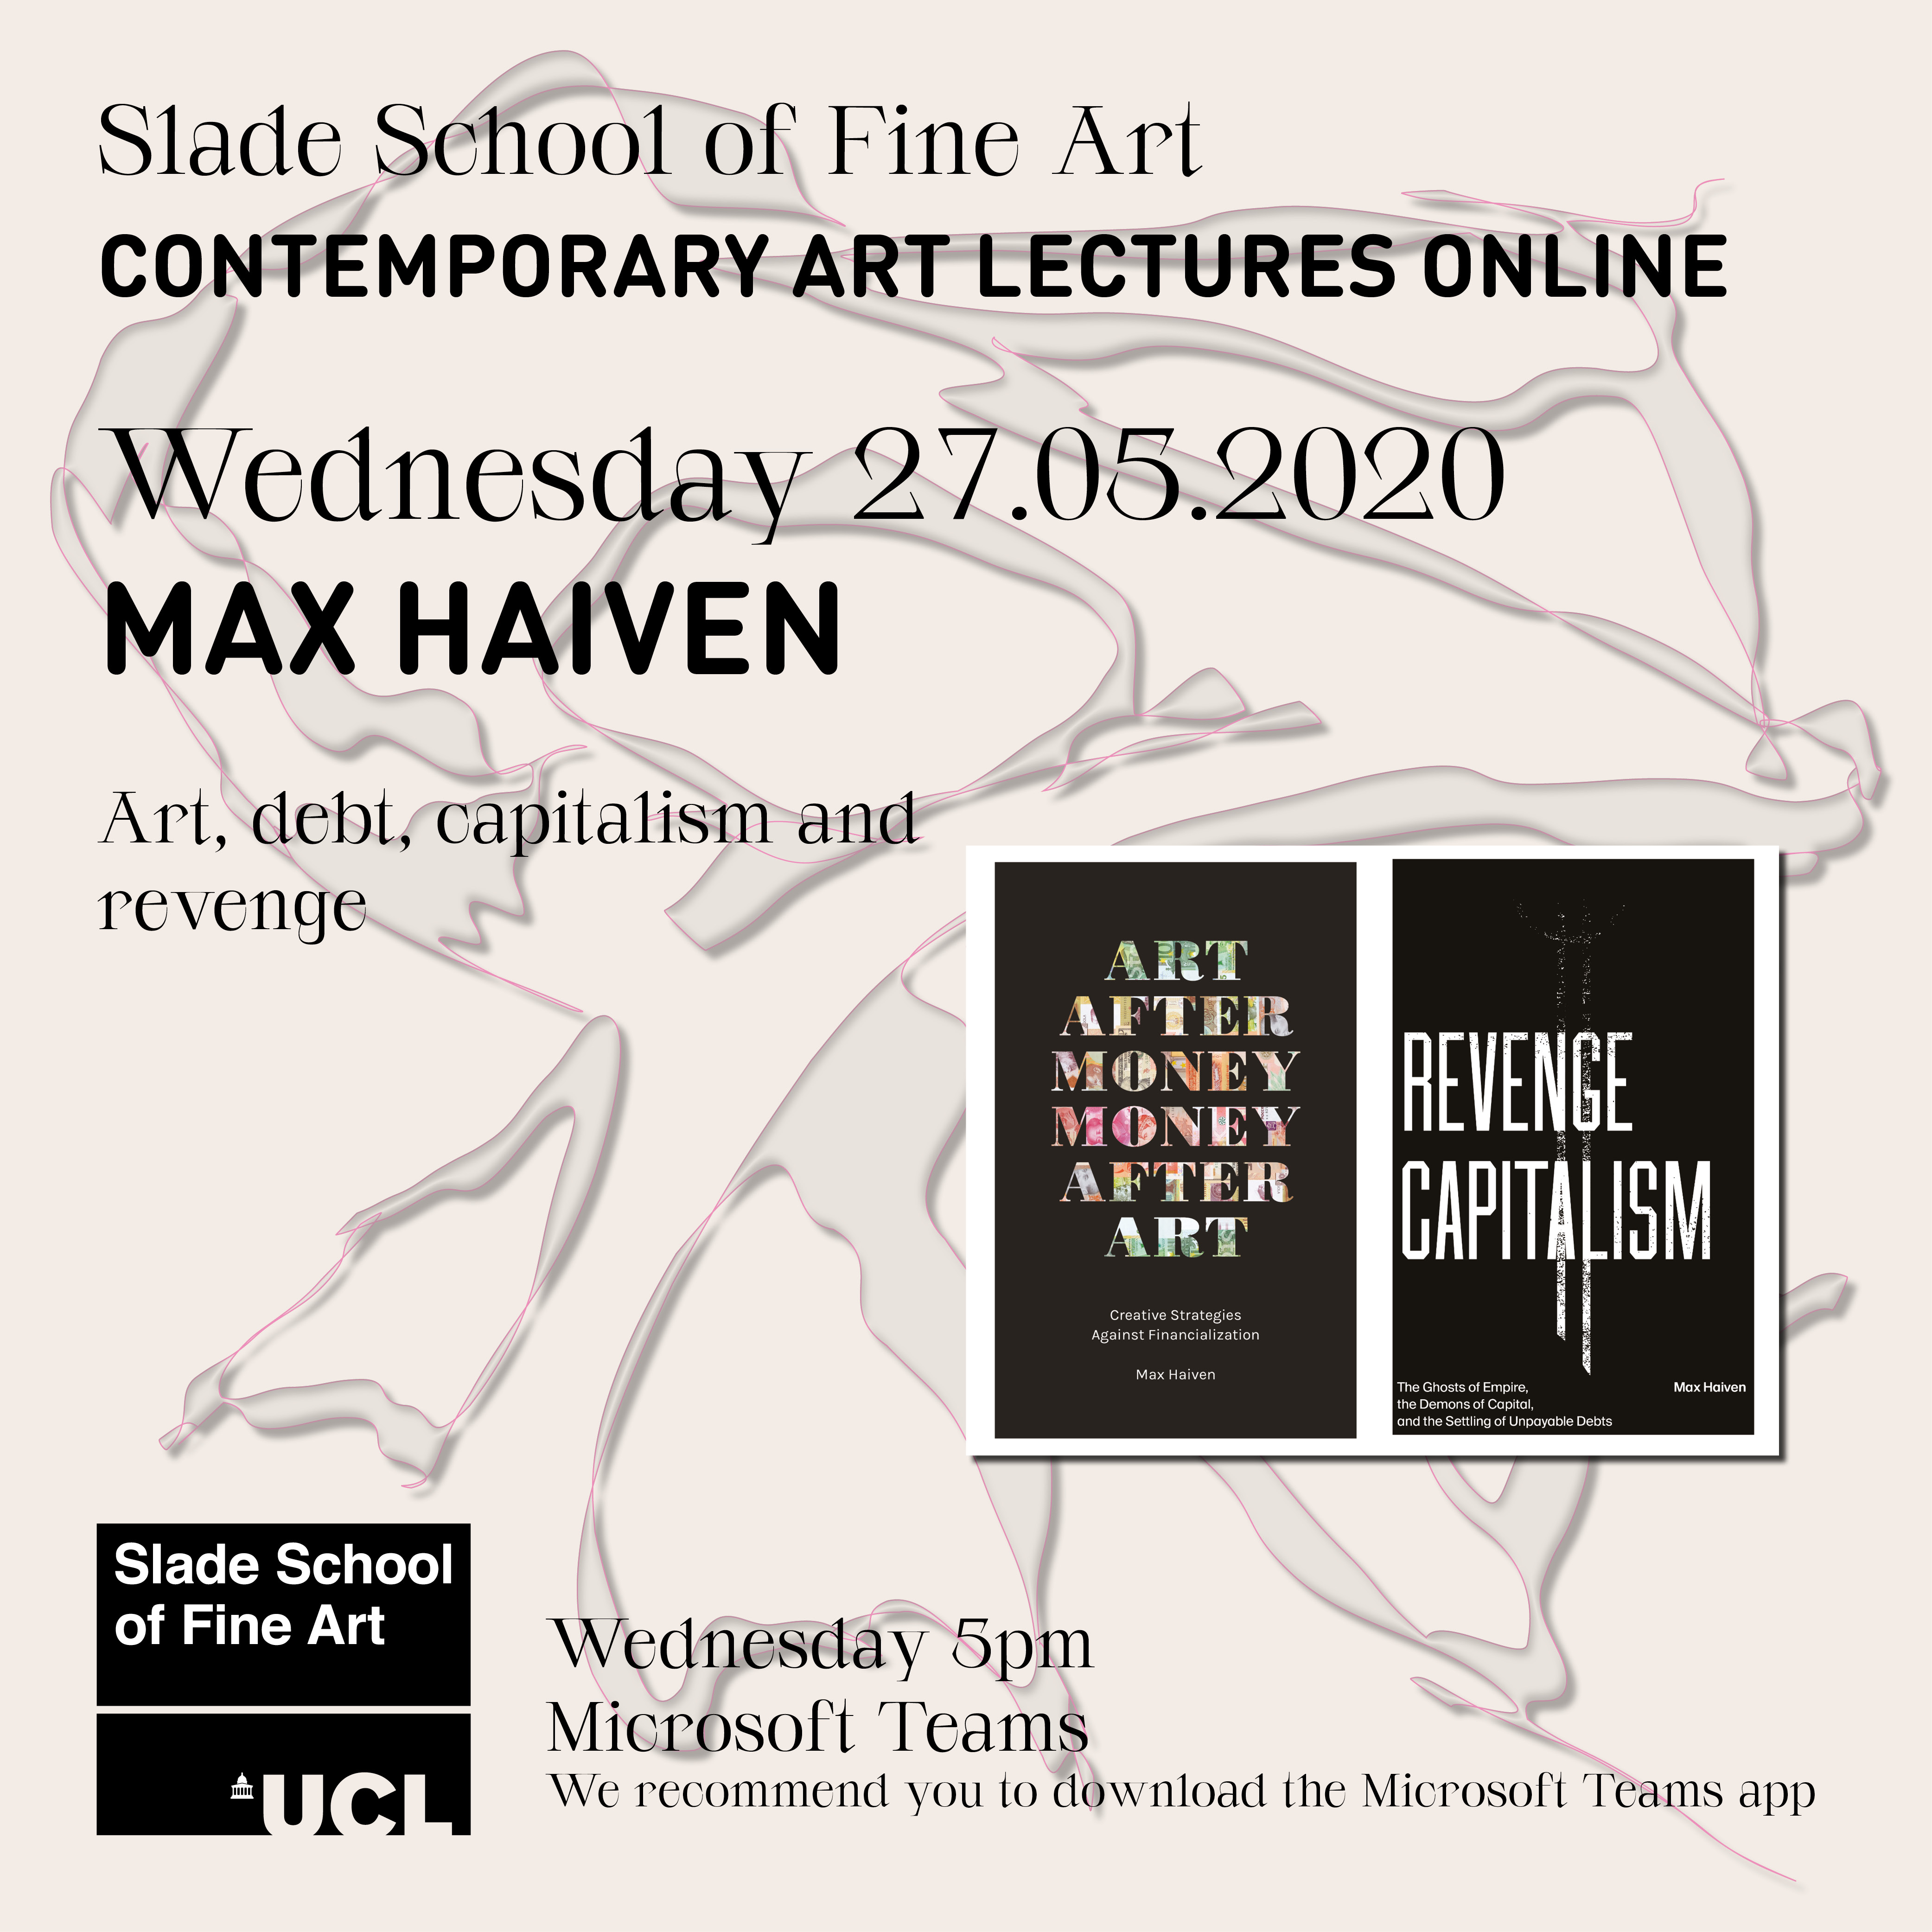 “Art, debt, capitalism and revenge” lecture at Slade